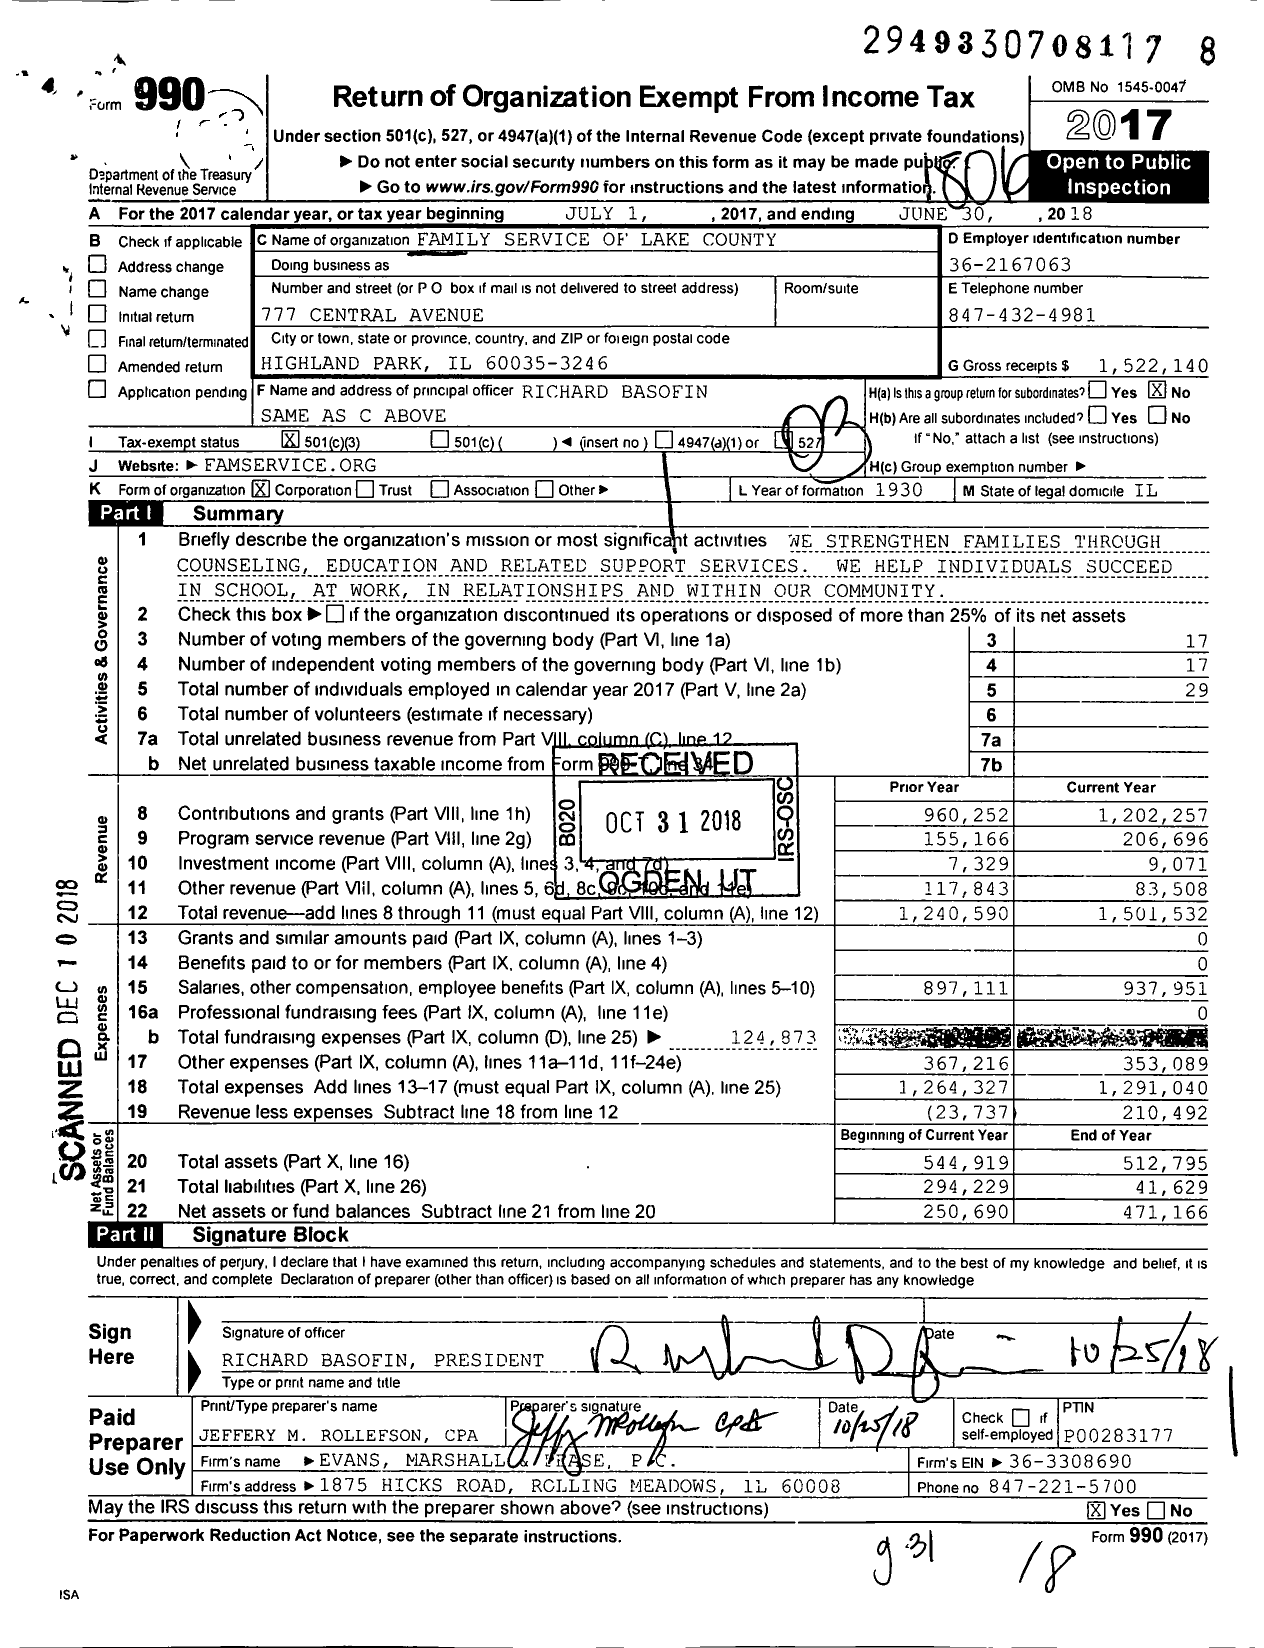 Image of first page of 2017 Form 990 for Family Service of Lake County